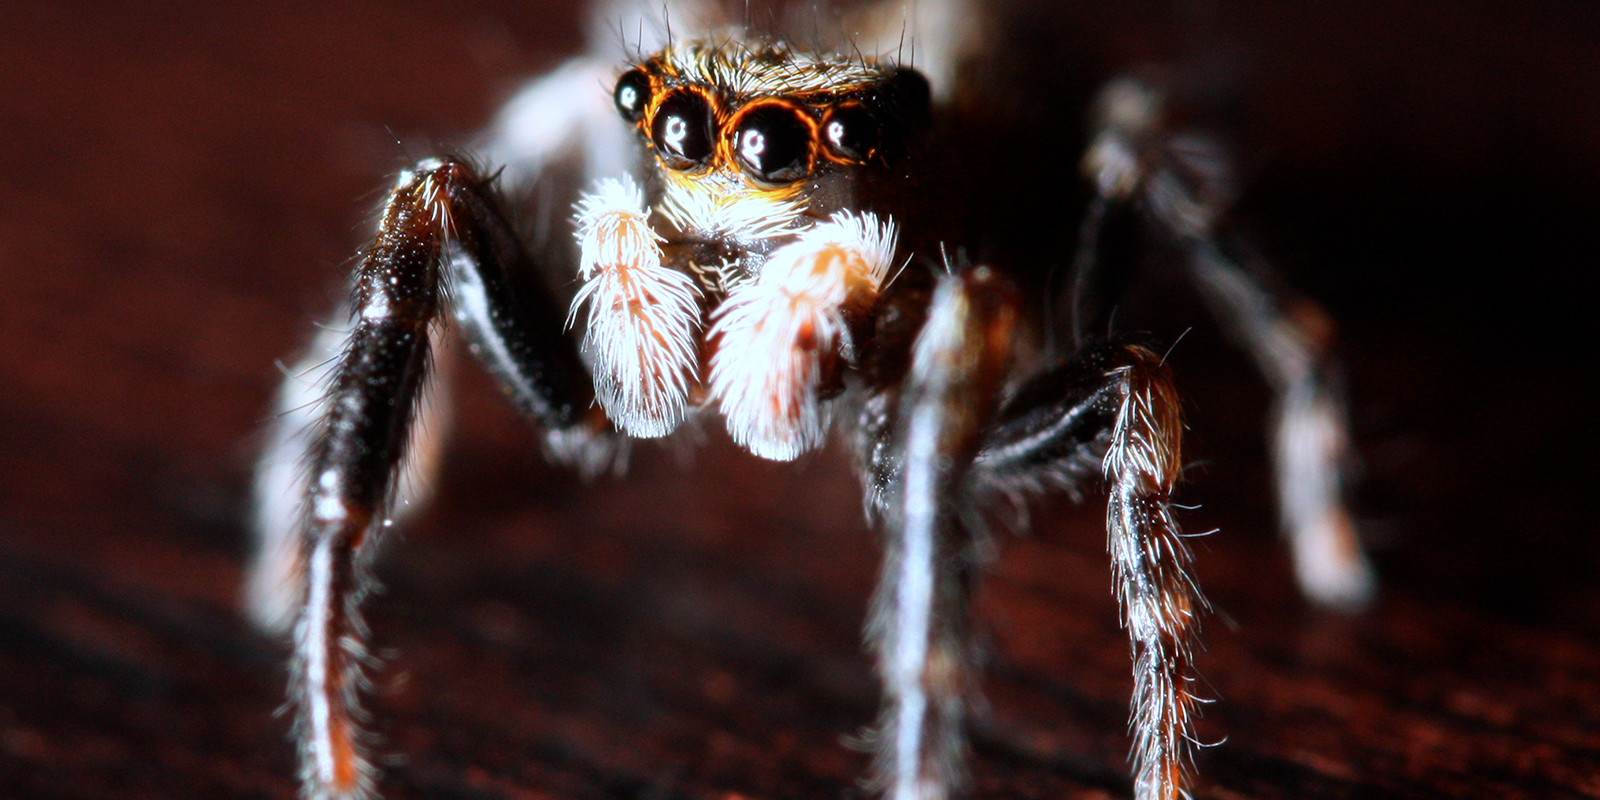 a close up of a spider showing it's big eyes and long legs